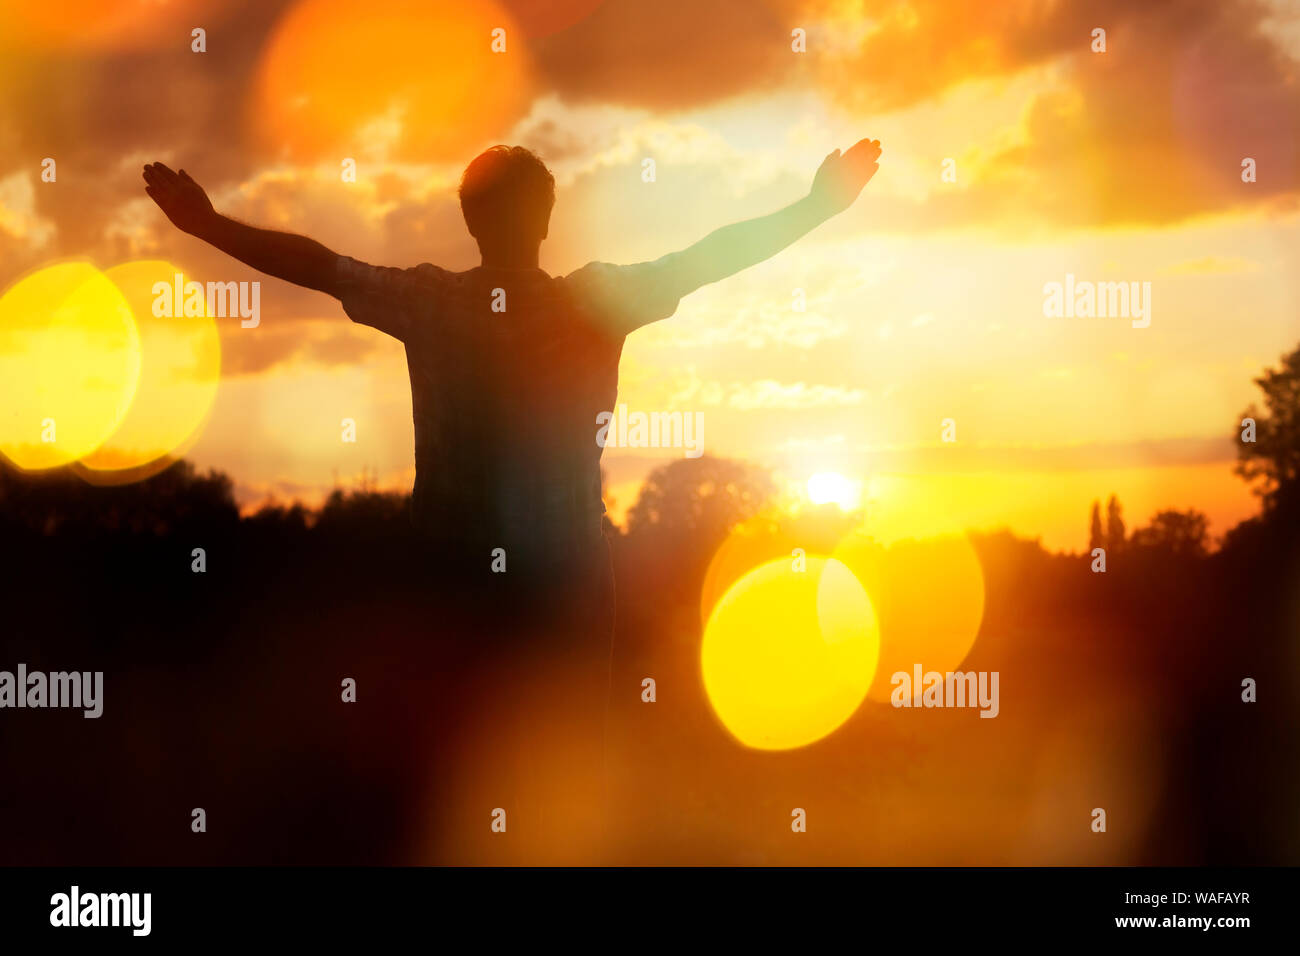 Silhouette of a man with hands raised in the sunset concept for religion, worship, prayer and praise Stock Photo